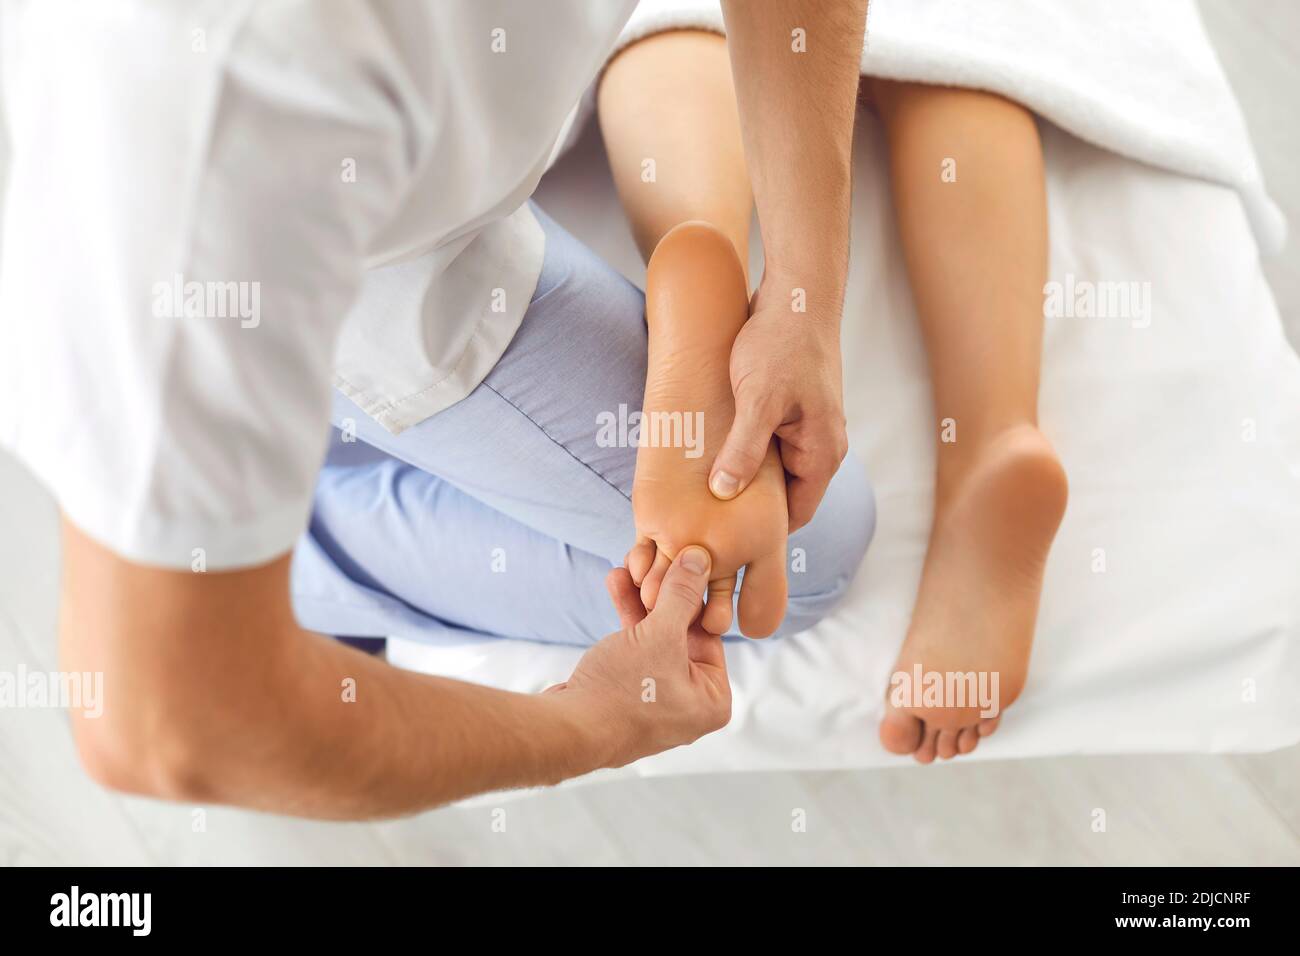 Professional reflexologist doing foot massage for female patient in modern health clinic Stock Photo